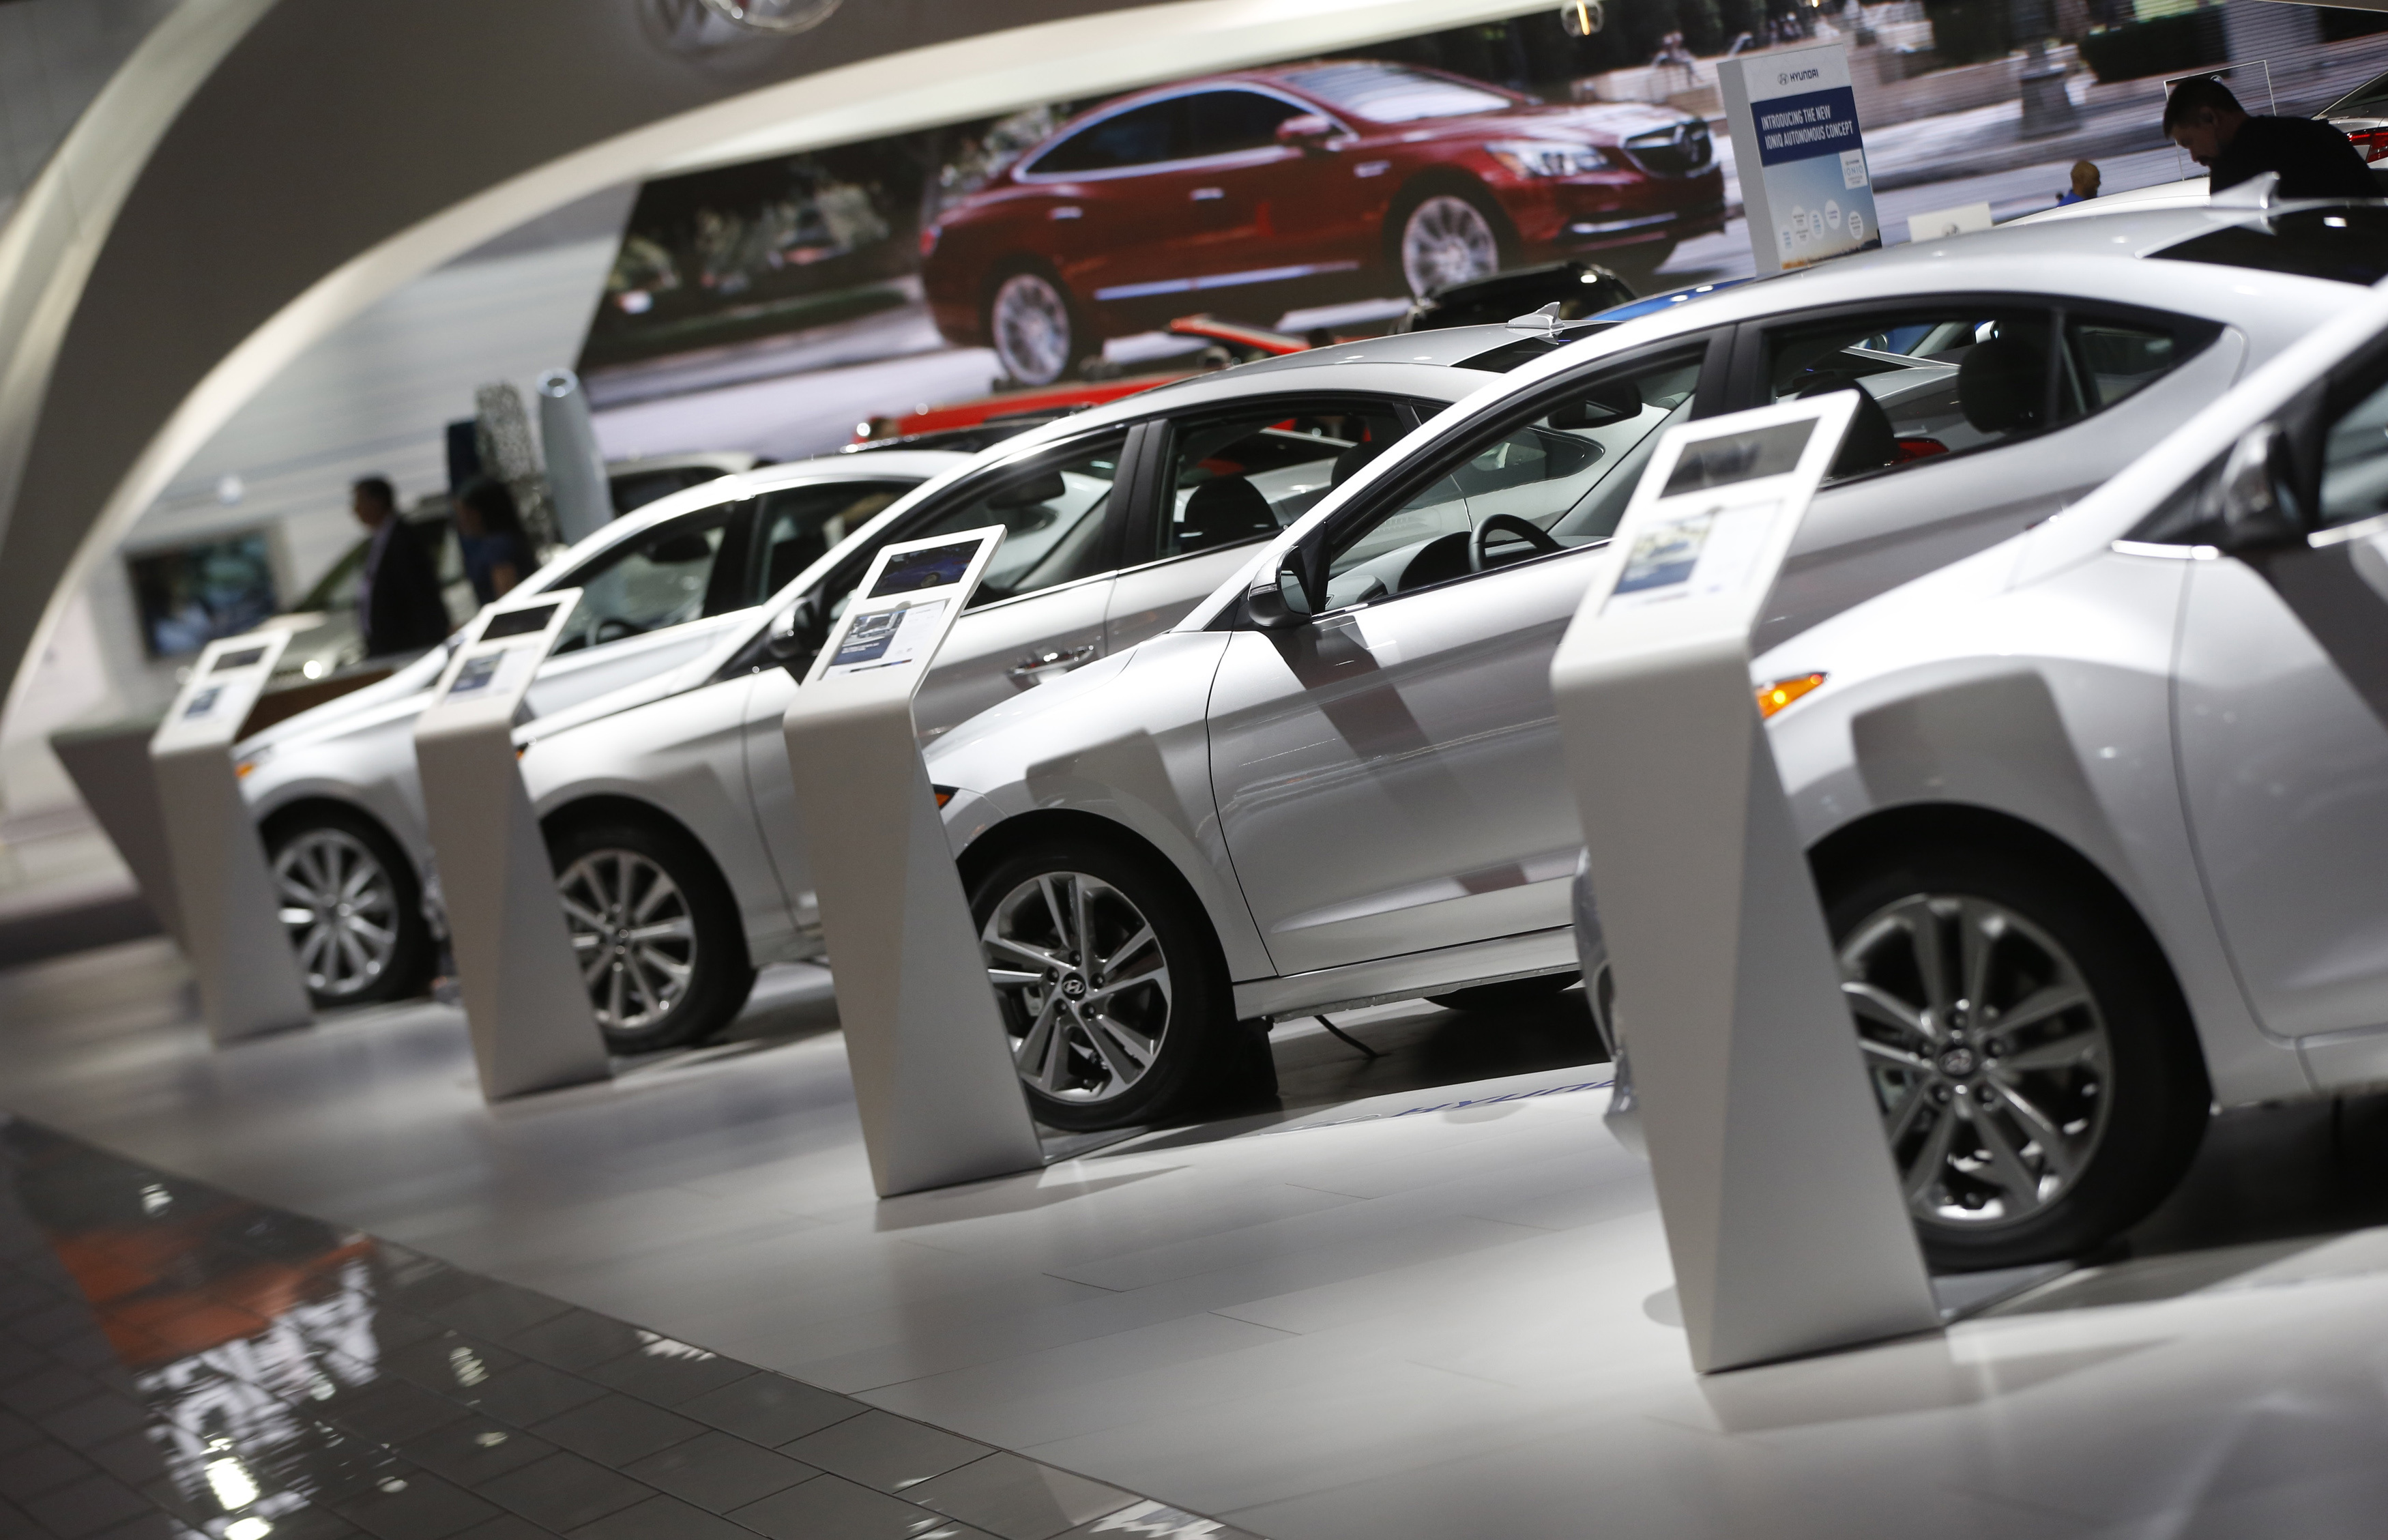 Hyundai vehicles are lined up in the company's presentation area during the North American International Auto Show in Detroit